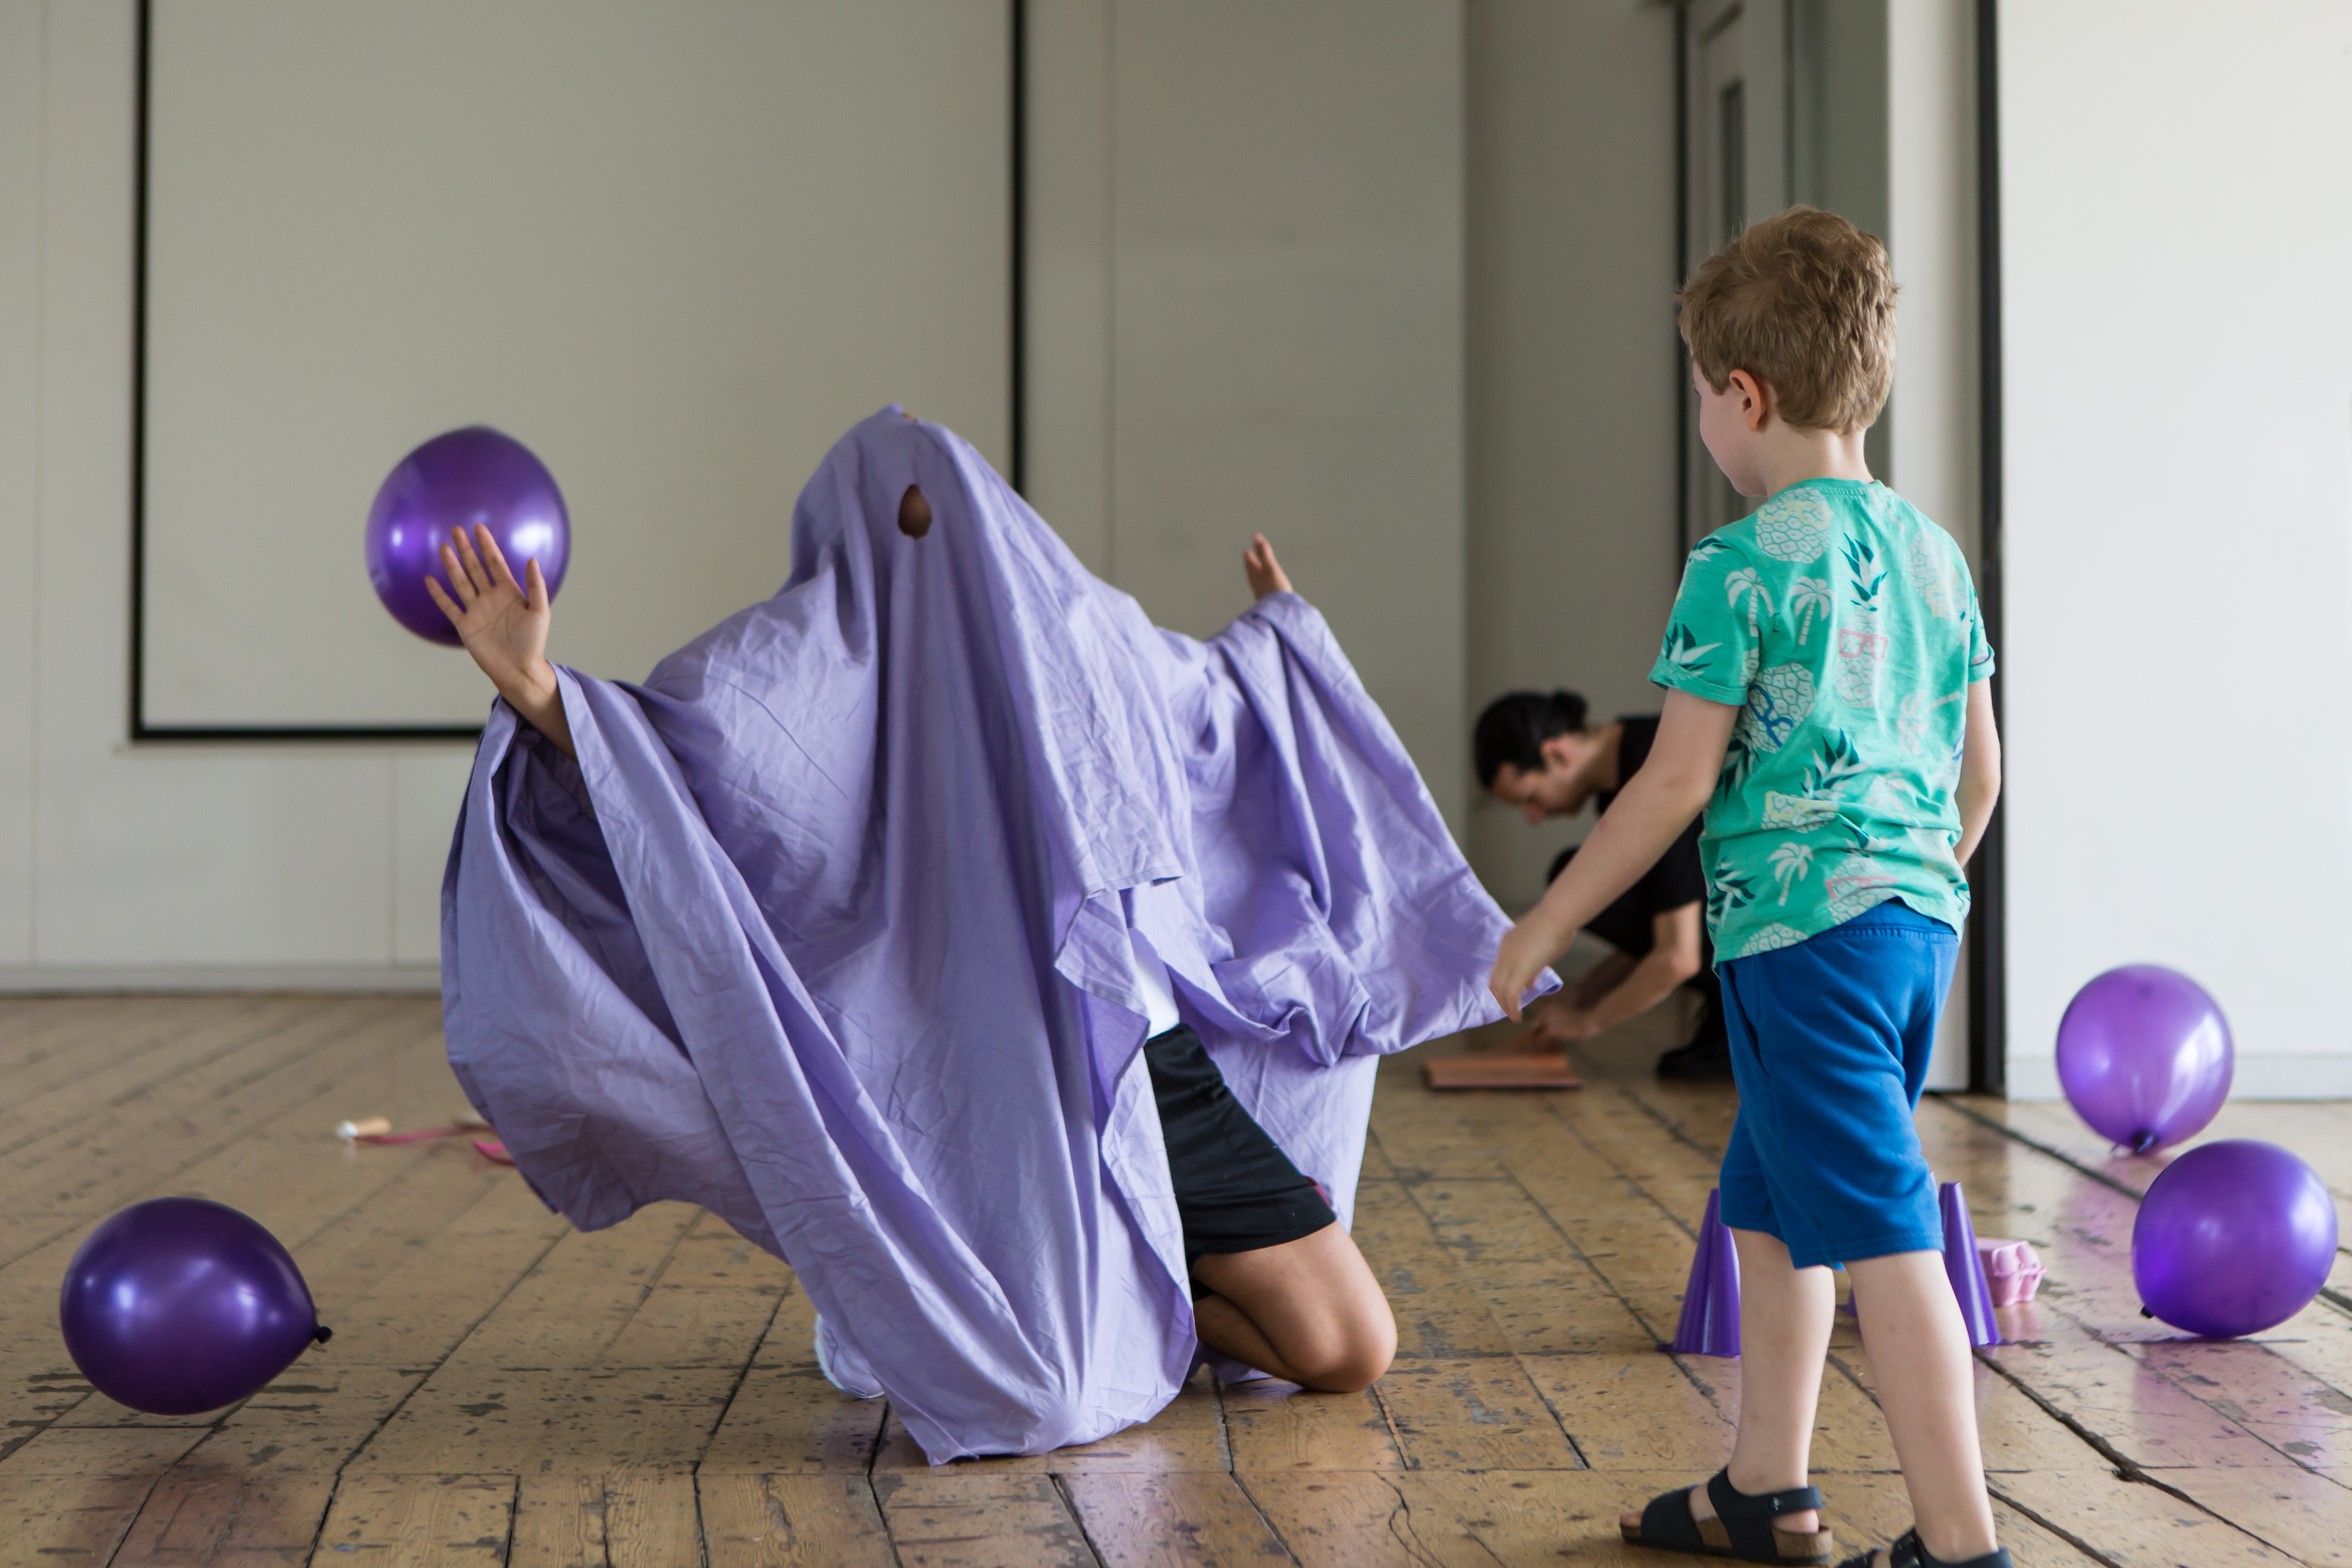 Jessie McLaughlin, Live Art for Children and Families.Photo by Rob Harris, courtesy of Whitechapel Gallery